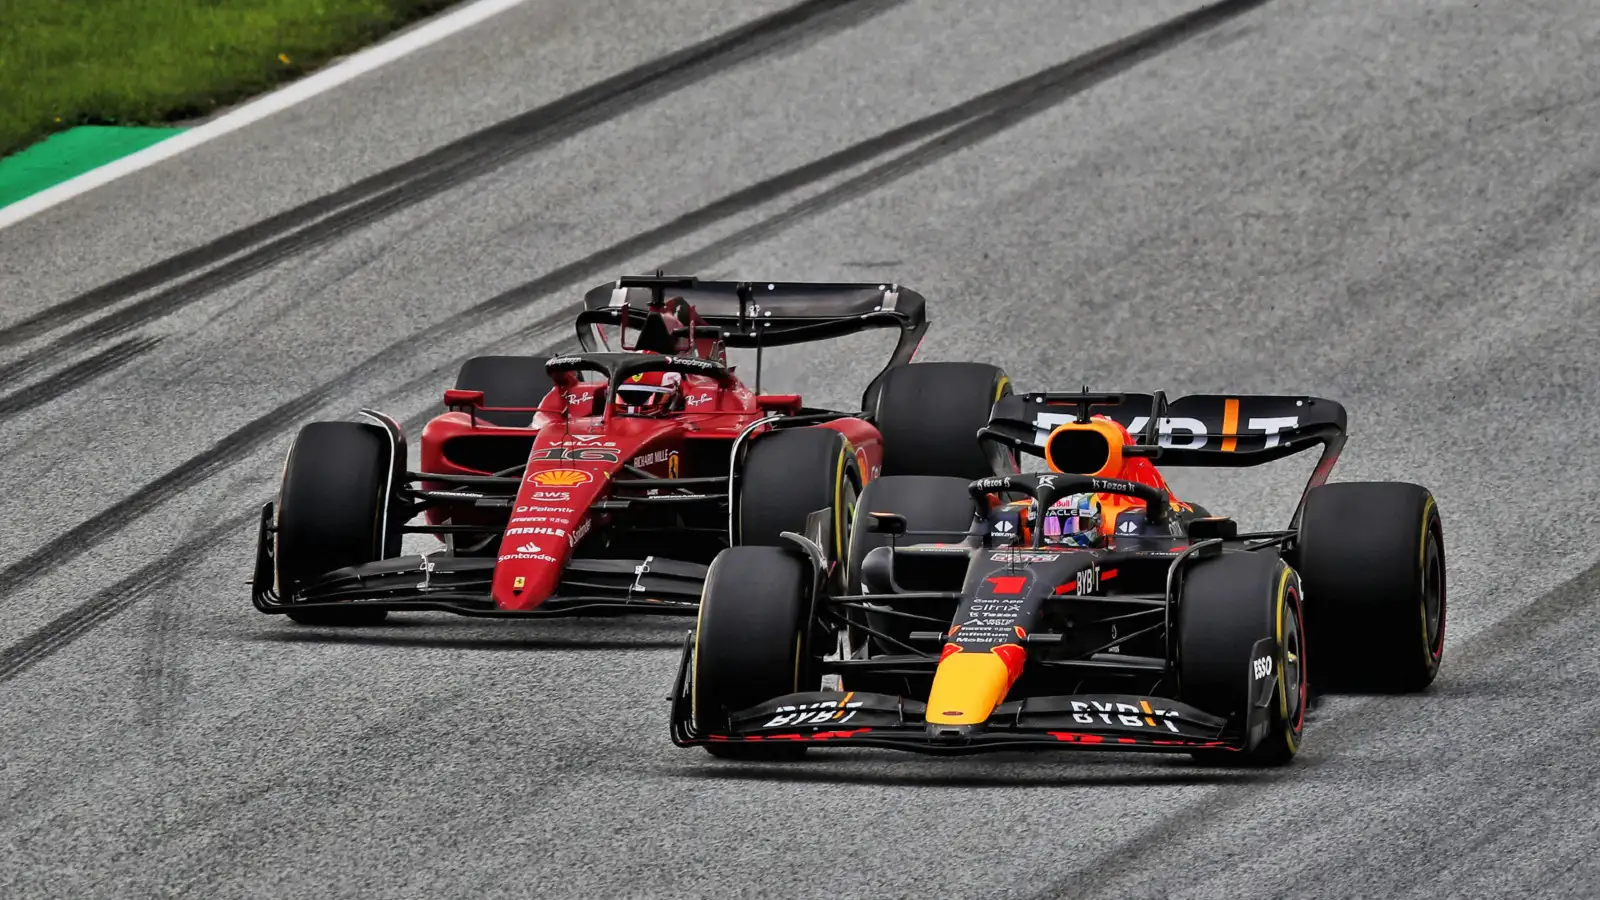 Red Bull driver Max Verstappen tries to fend off Ferrari driver Charles Leclerc at the Austrian Grand Prix. Spielberg, July 2022.